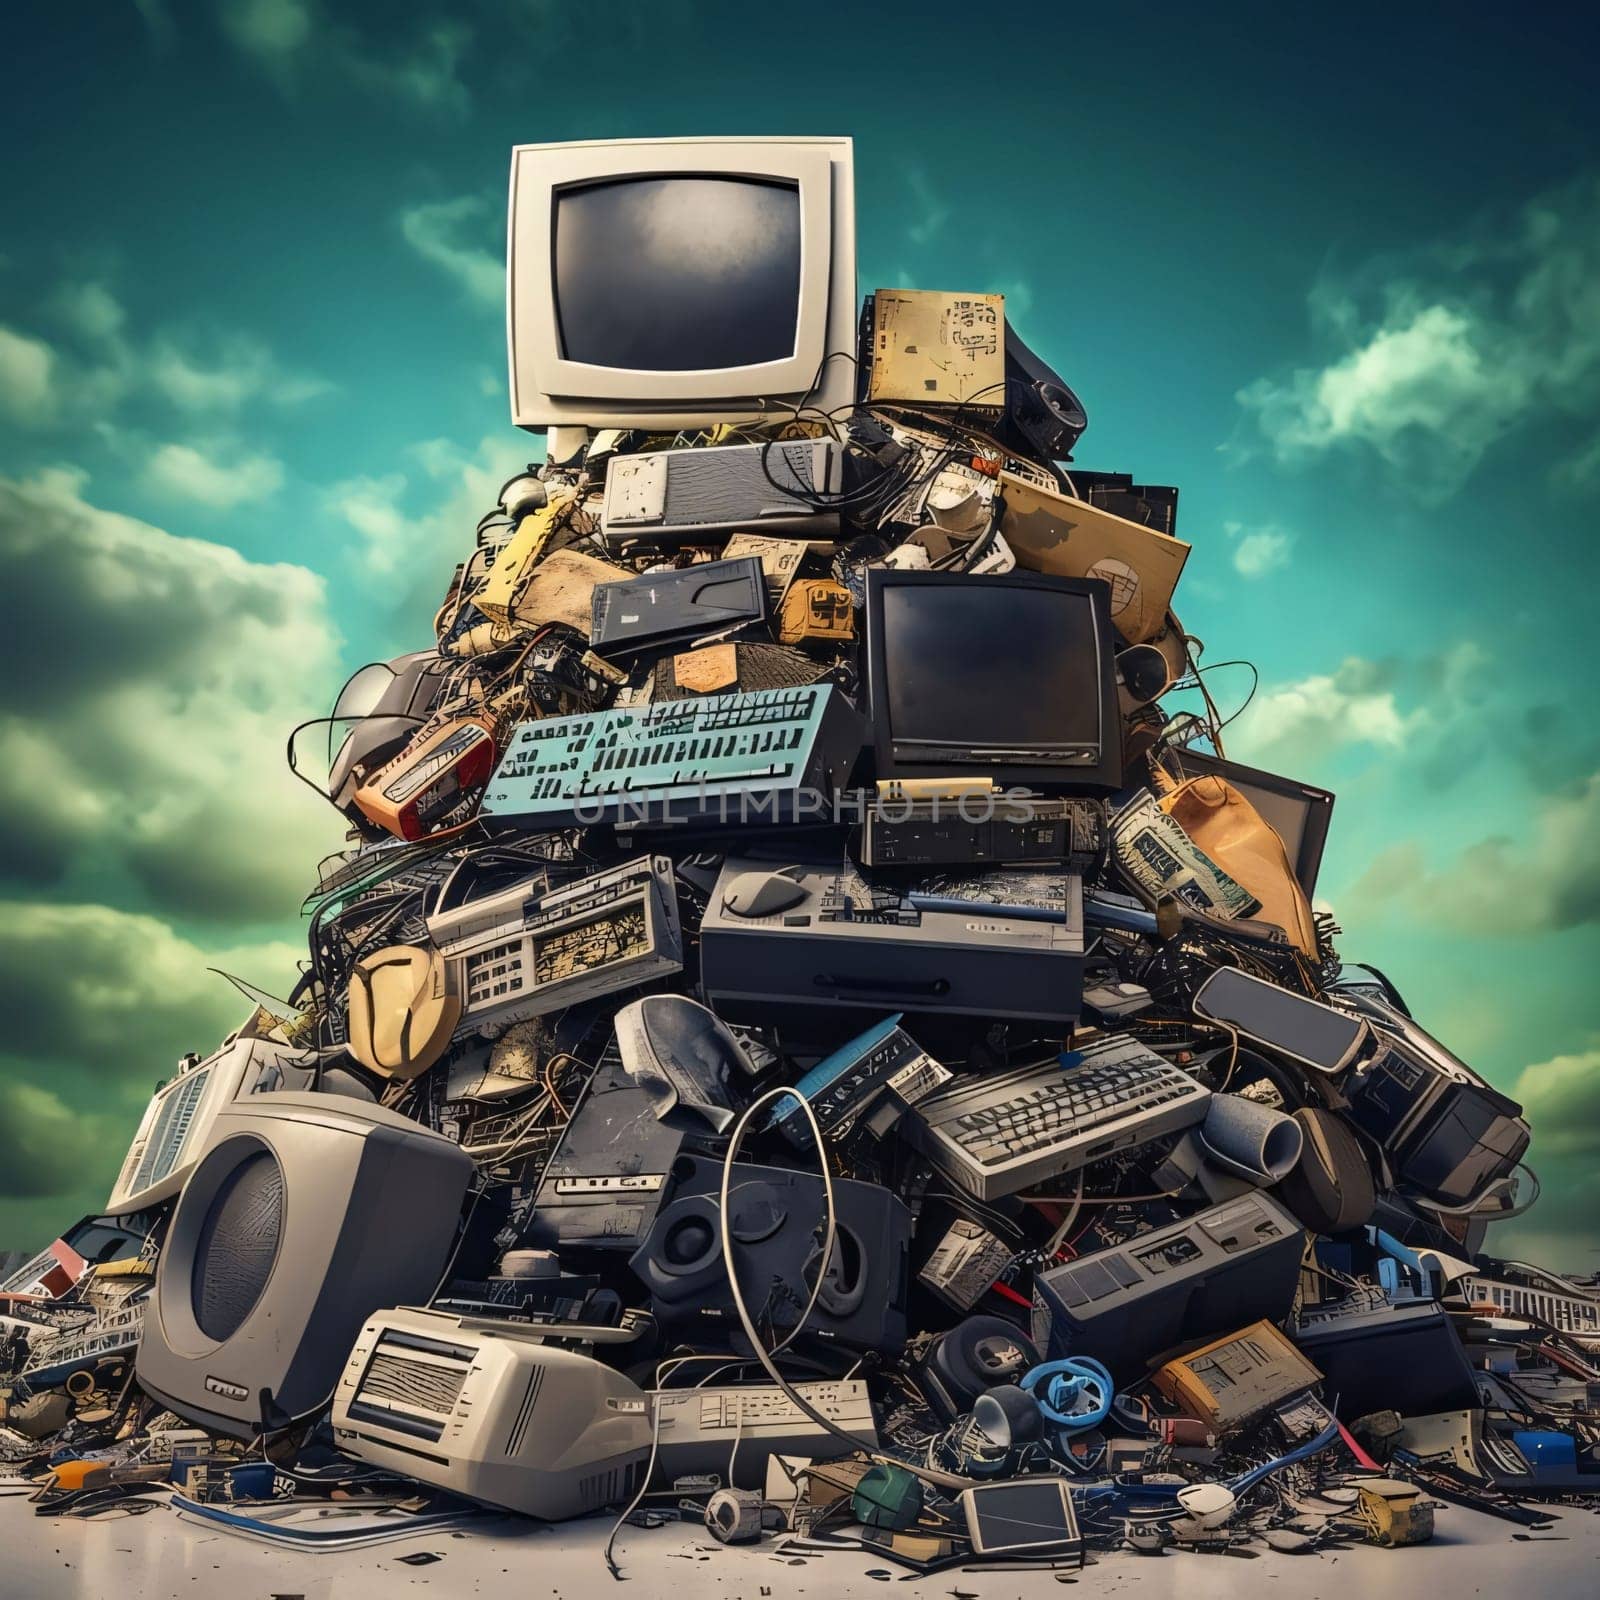 Pile of old television and other electronic devices on a sky background by ThemesS